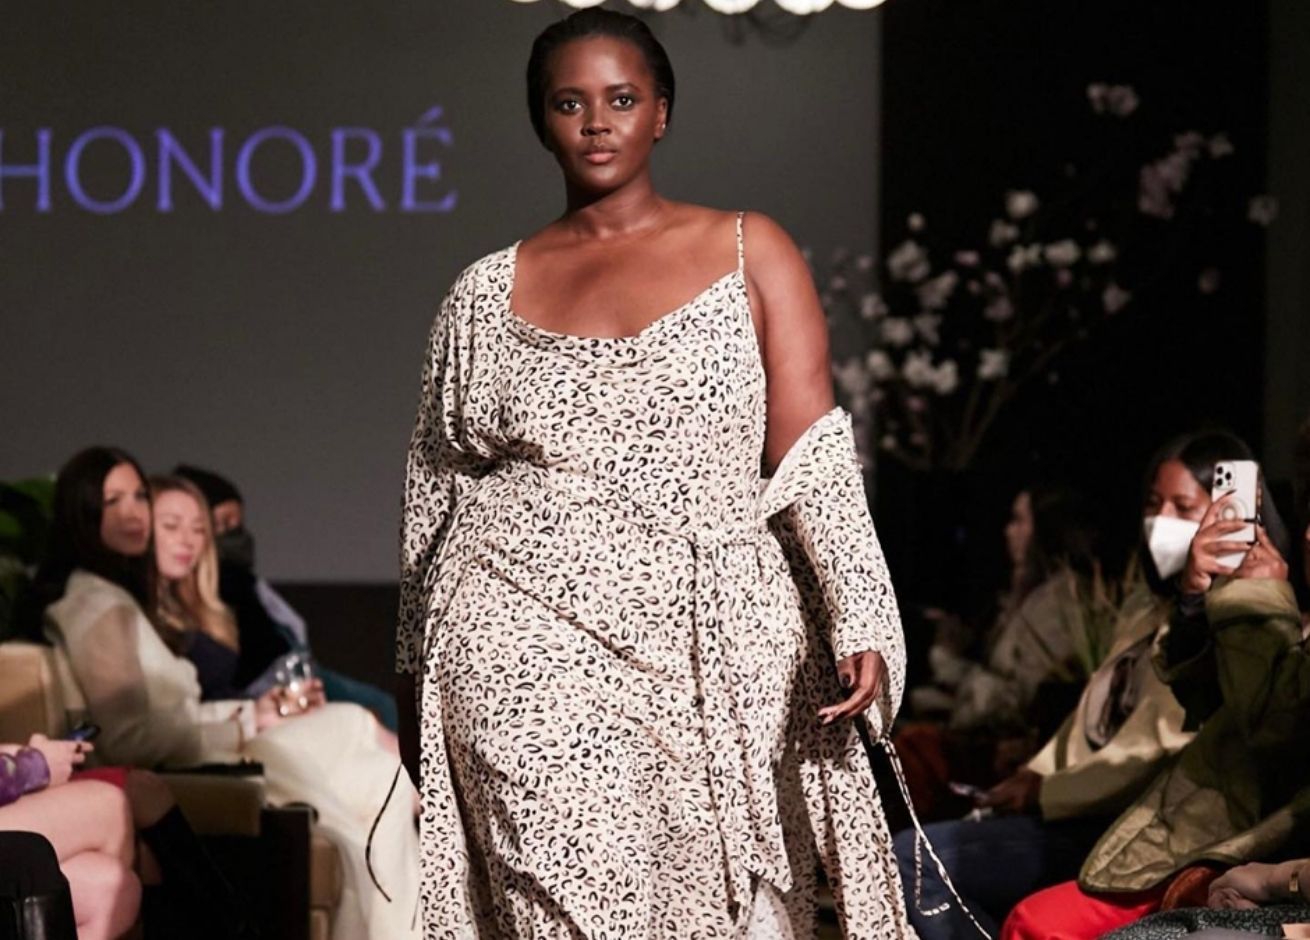 Best looks from NYFW: 11 Honoré